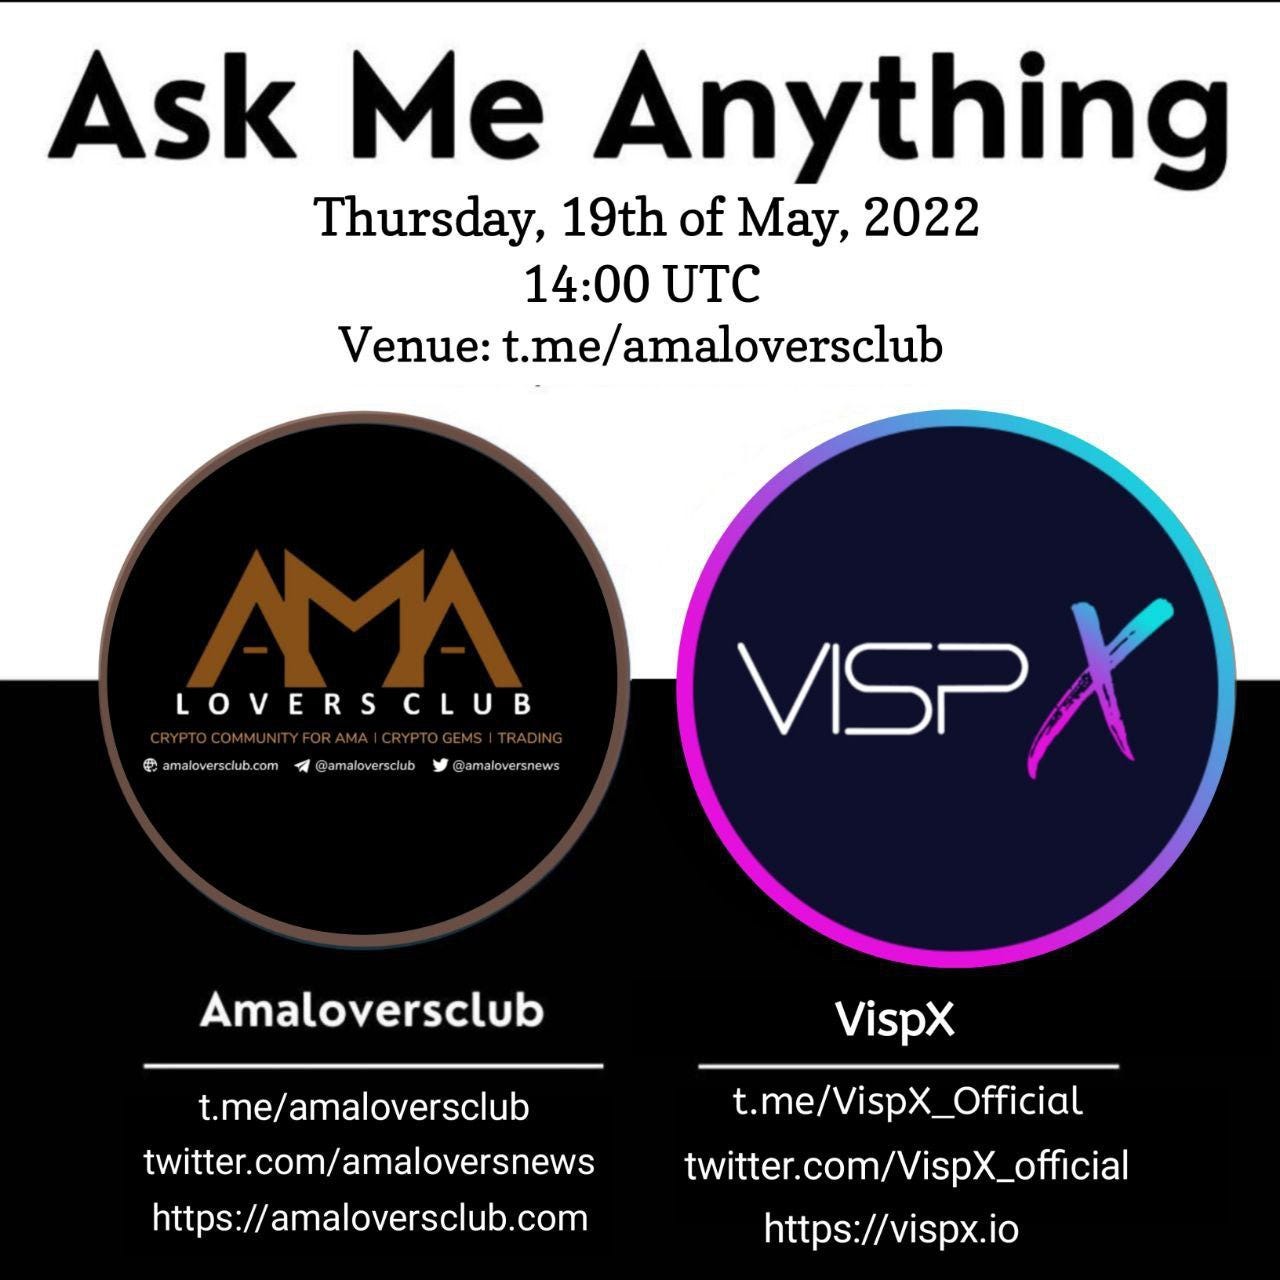 Recapitulation of VispX PROJECT AMA event held at AMA LOVERS CLUB.